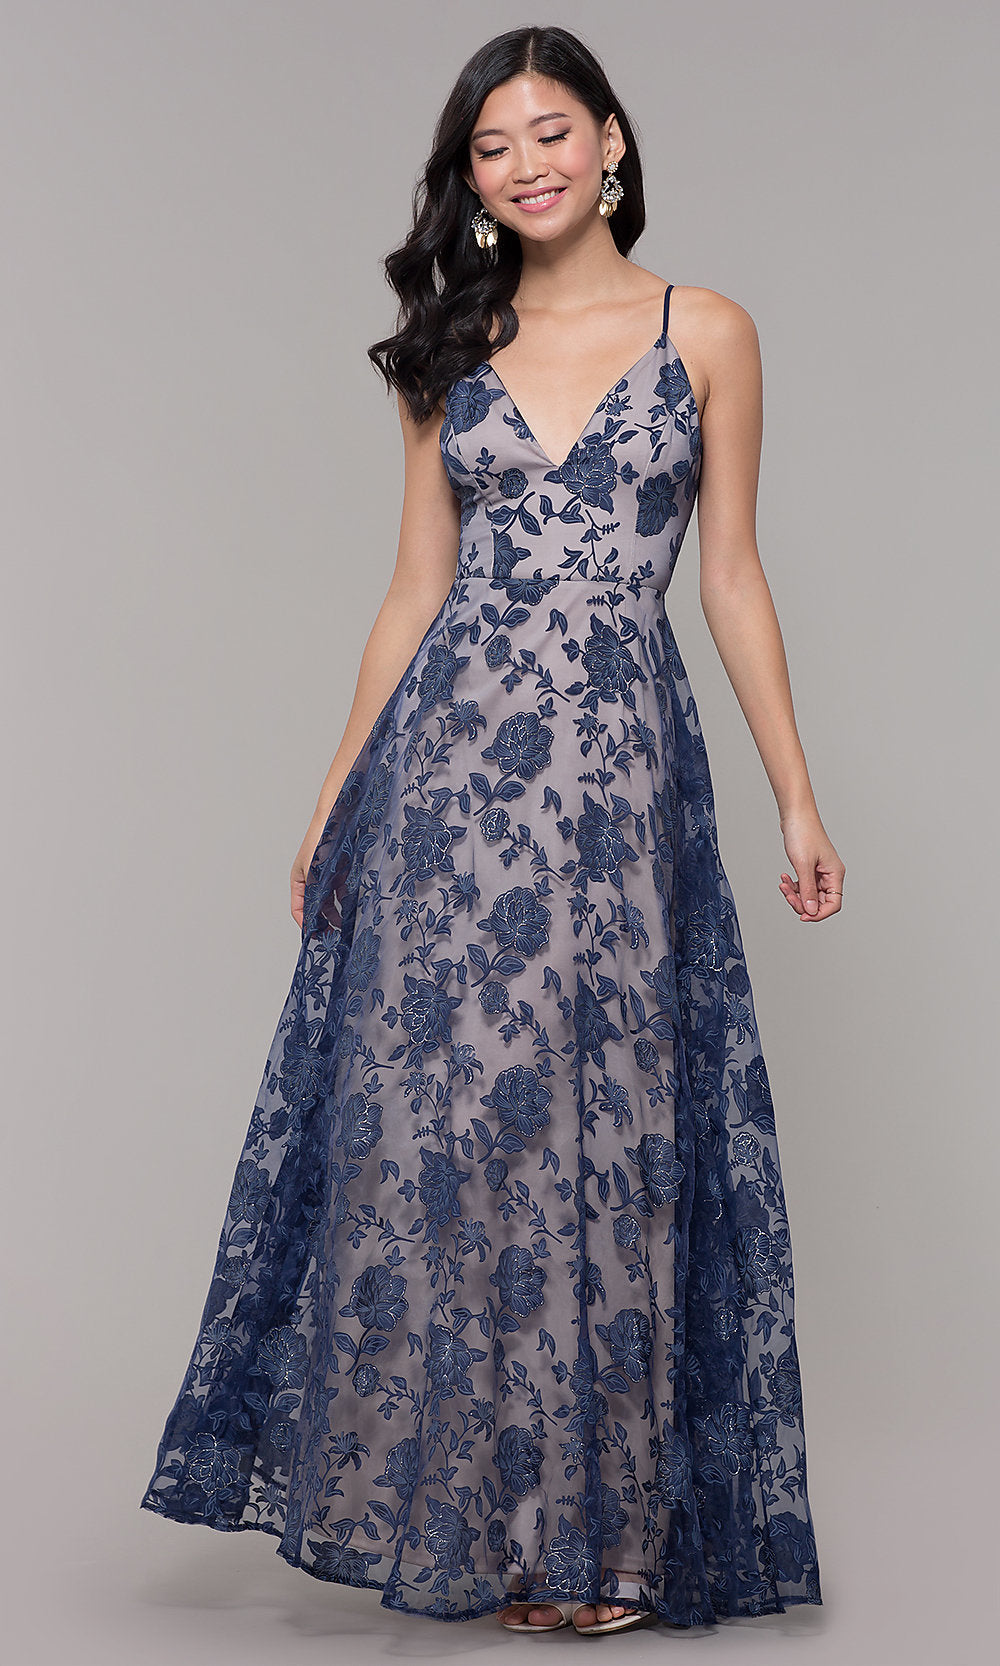  Long Formal Prom Dress with Glitter Floral Print